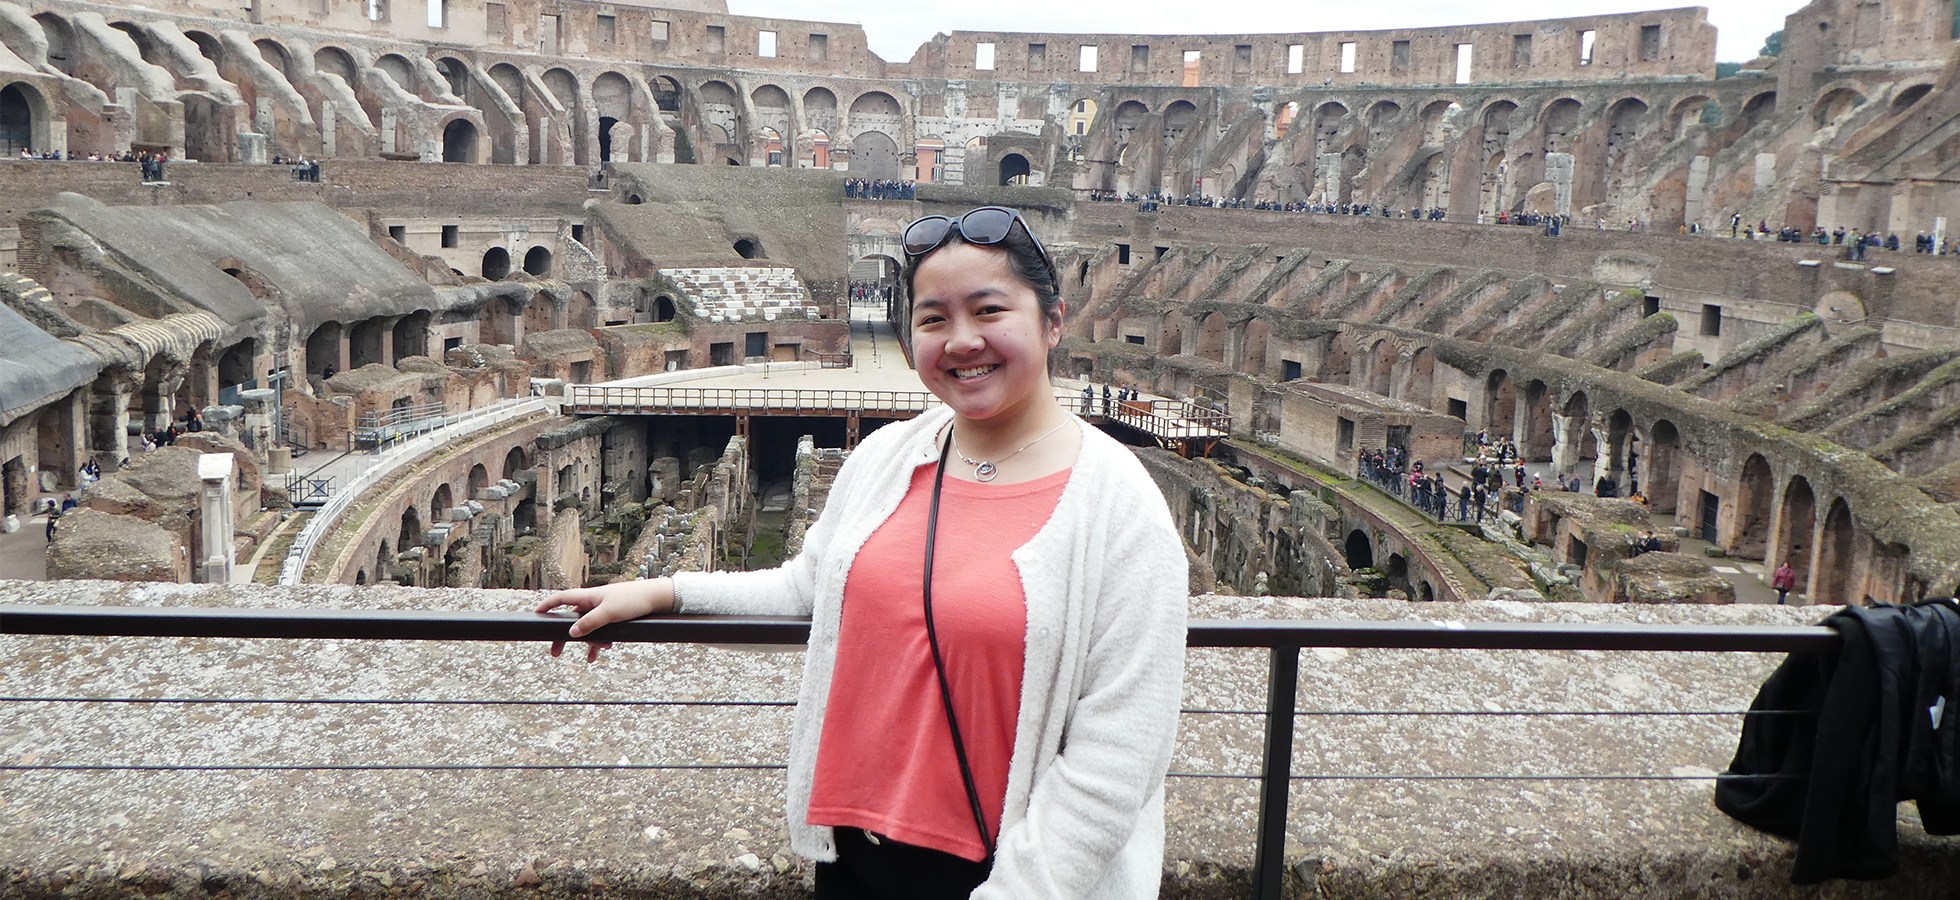 Isabella Bolognese ’20 at the Colosseum in Rome who was named the recipient of the 2020 George A. Doyle Merit Award for Excellence in Economics or Global Studies.